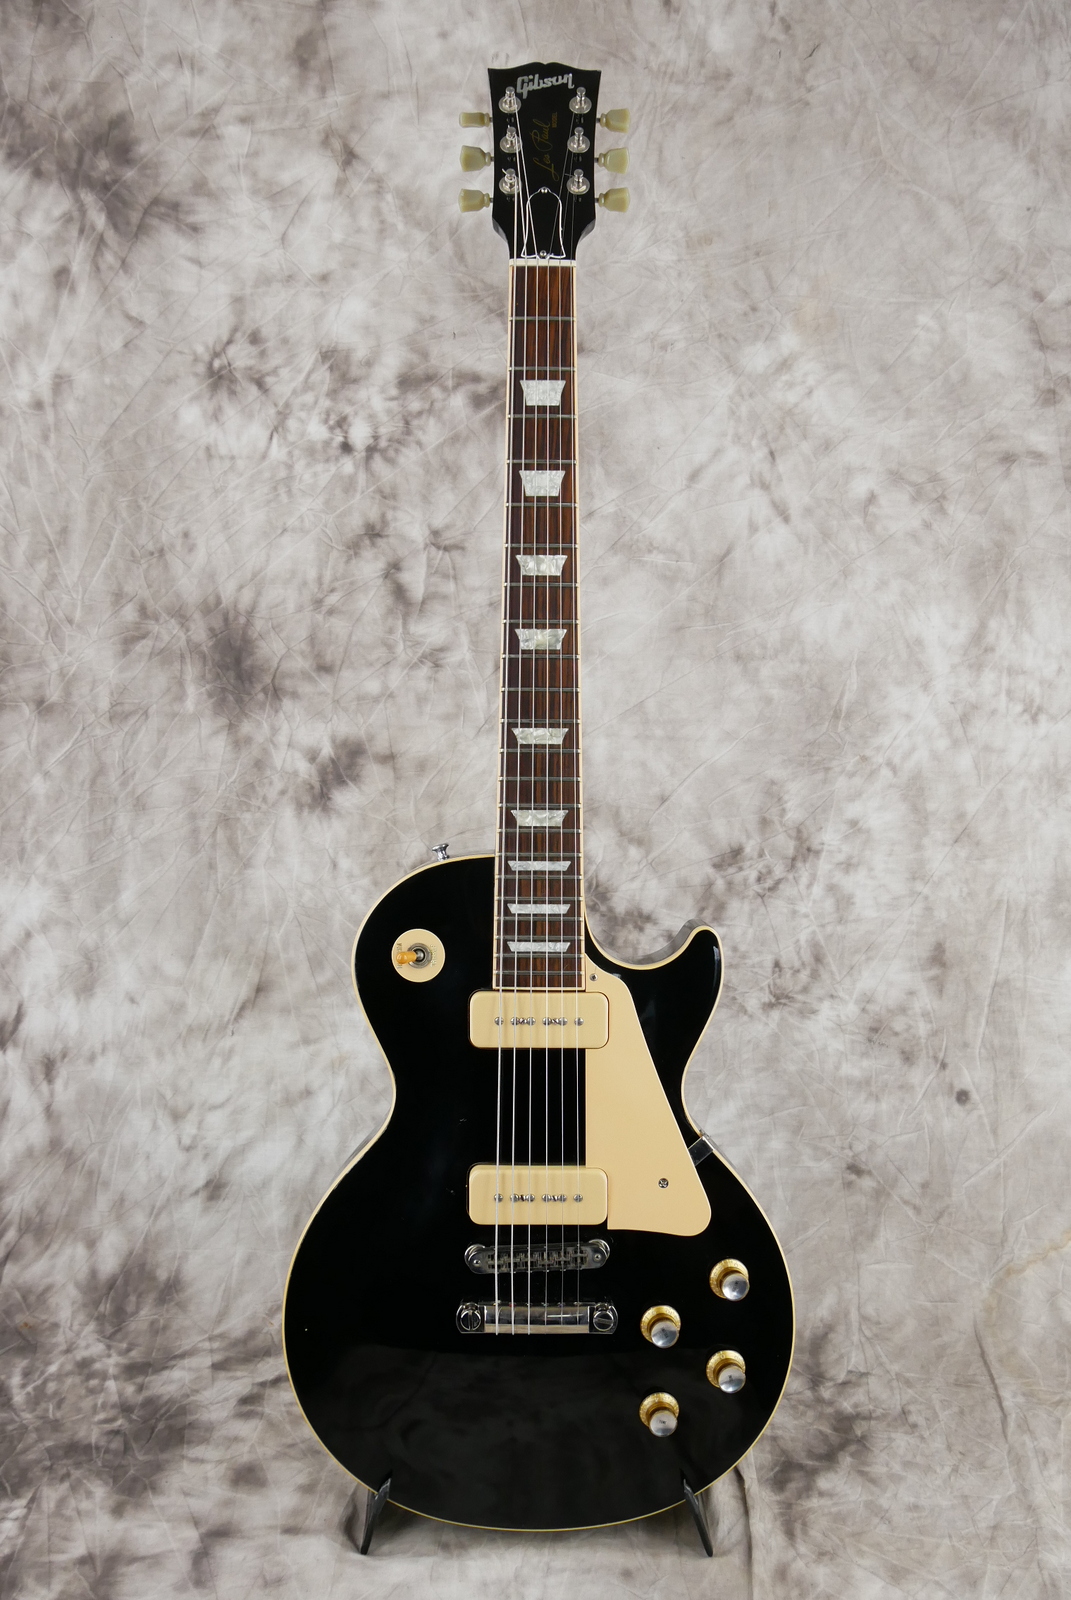 Gibson_Les_Paul_Deluxe_limited_edtion_black_2000-001.JPG